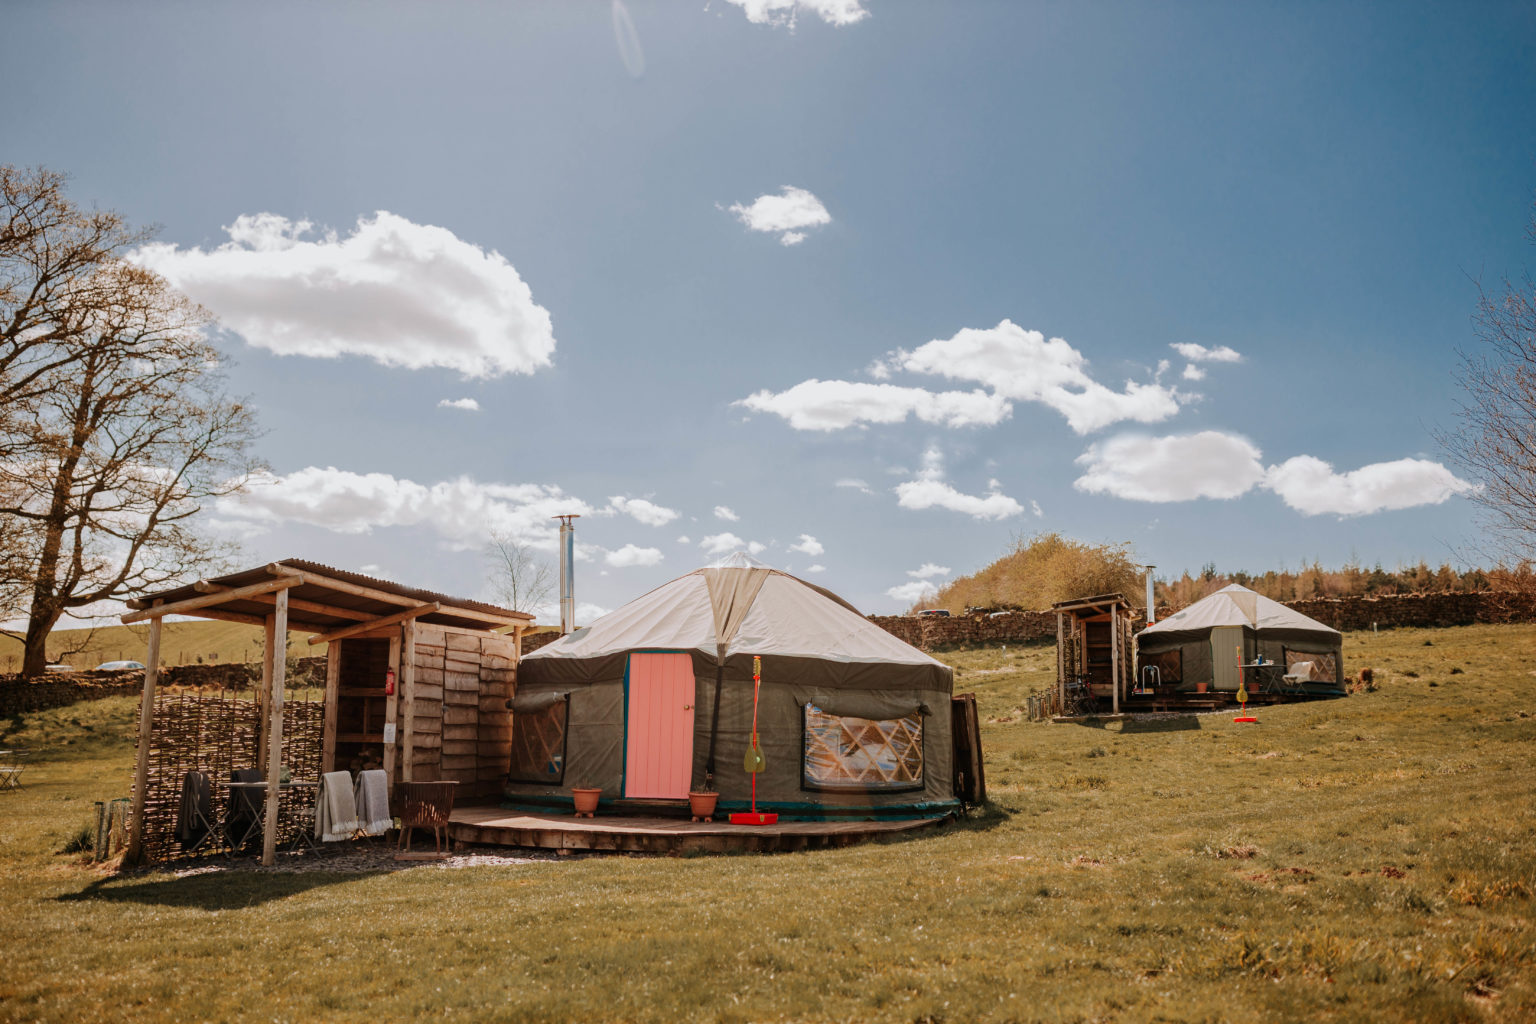 Luxury Meadow Yurts at Swinton Bivouac, near the Yorkshire Dales in North Yorkshire